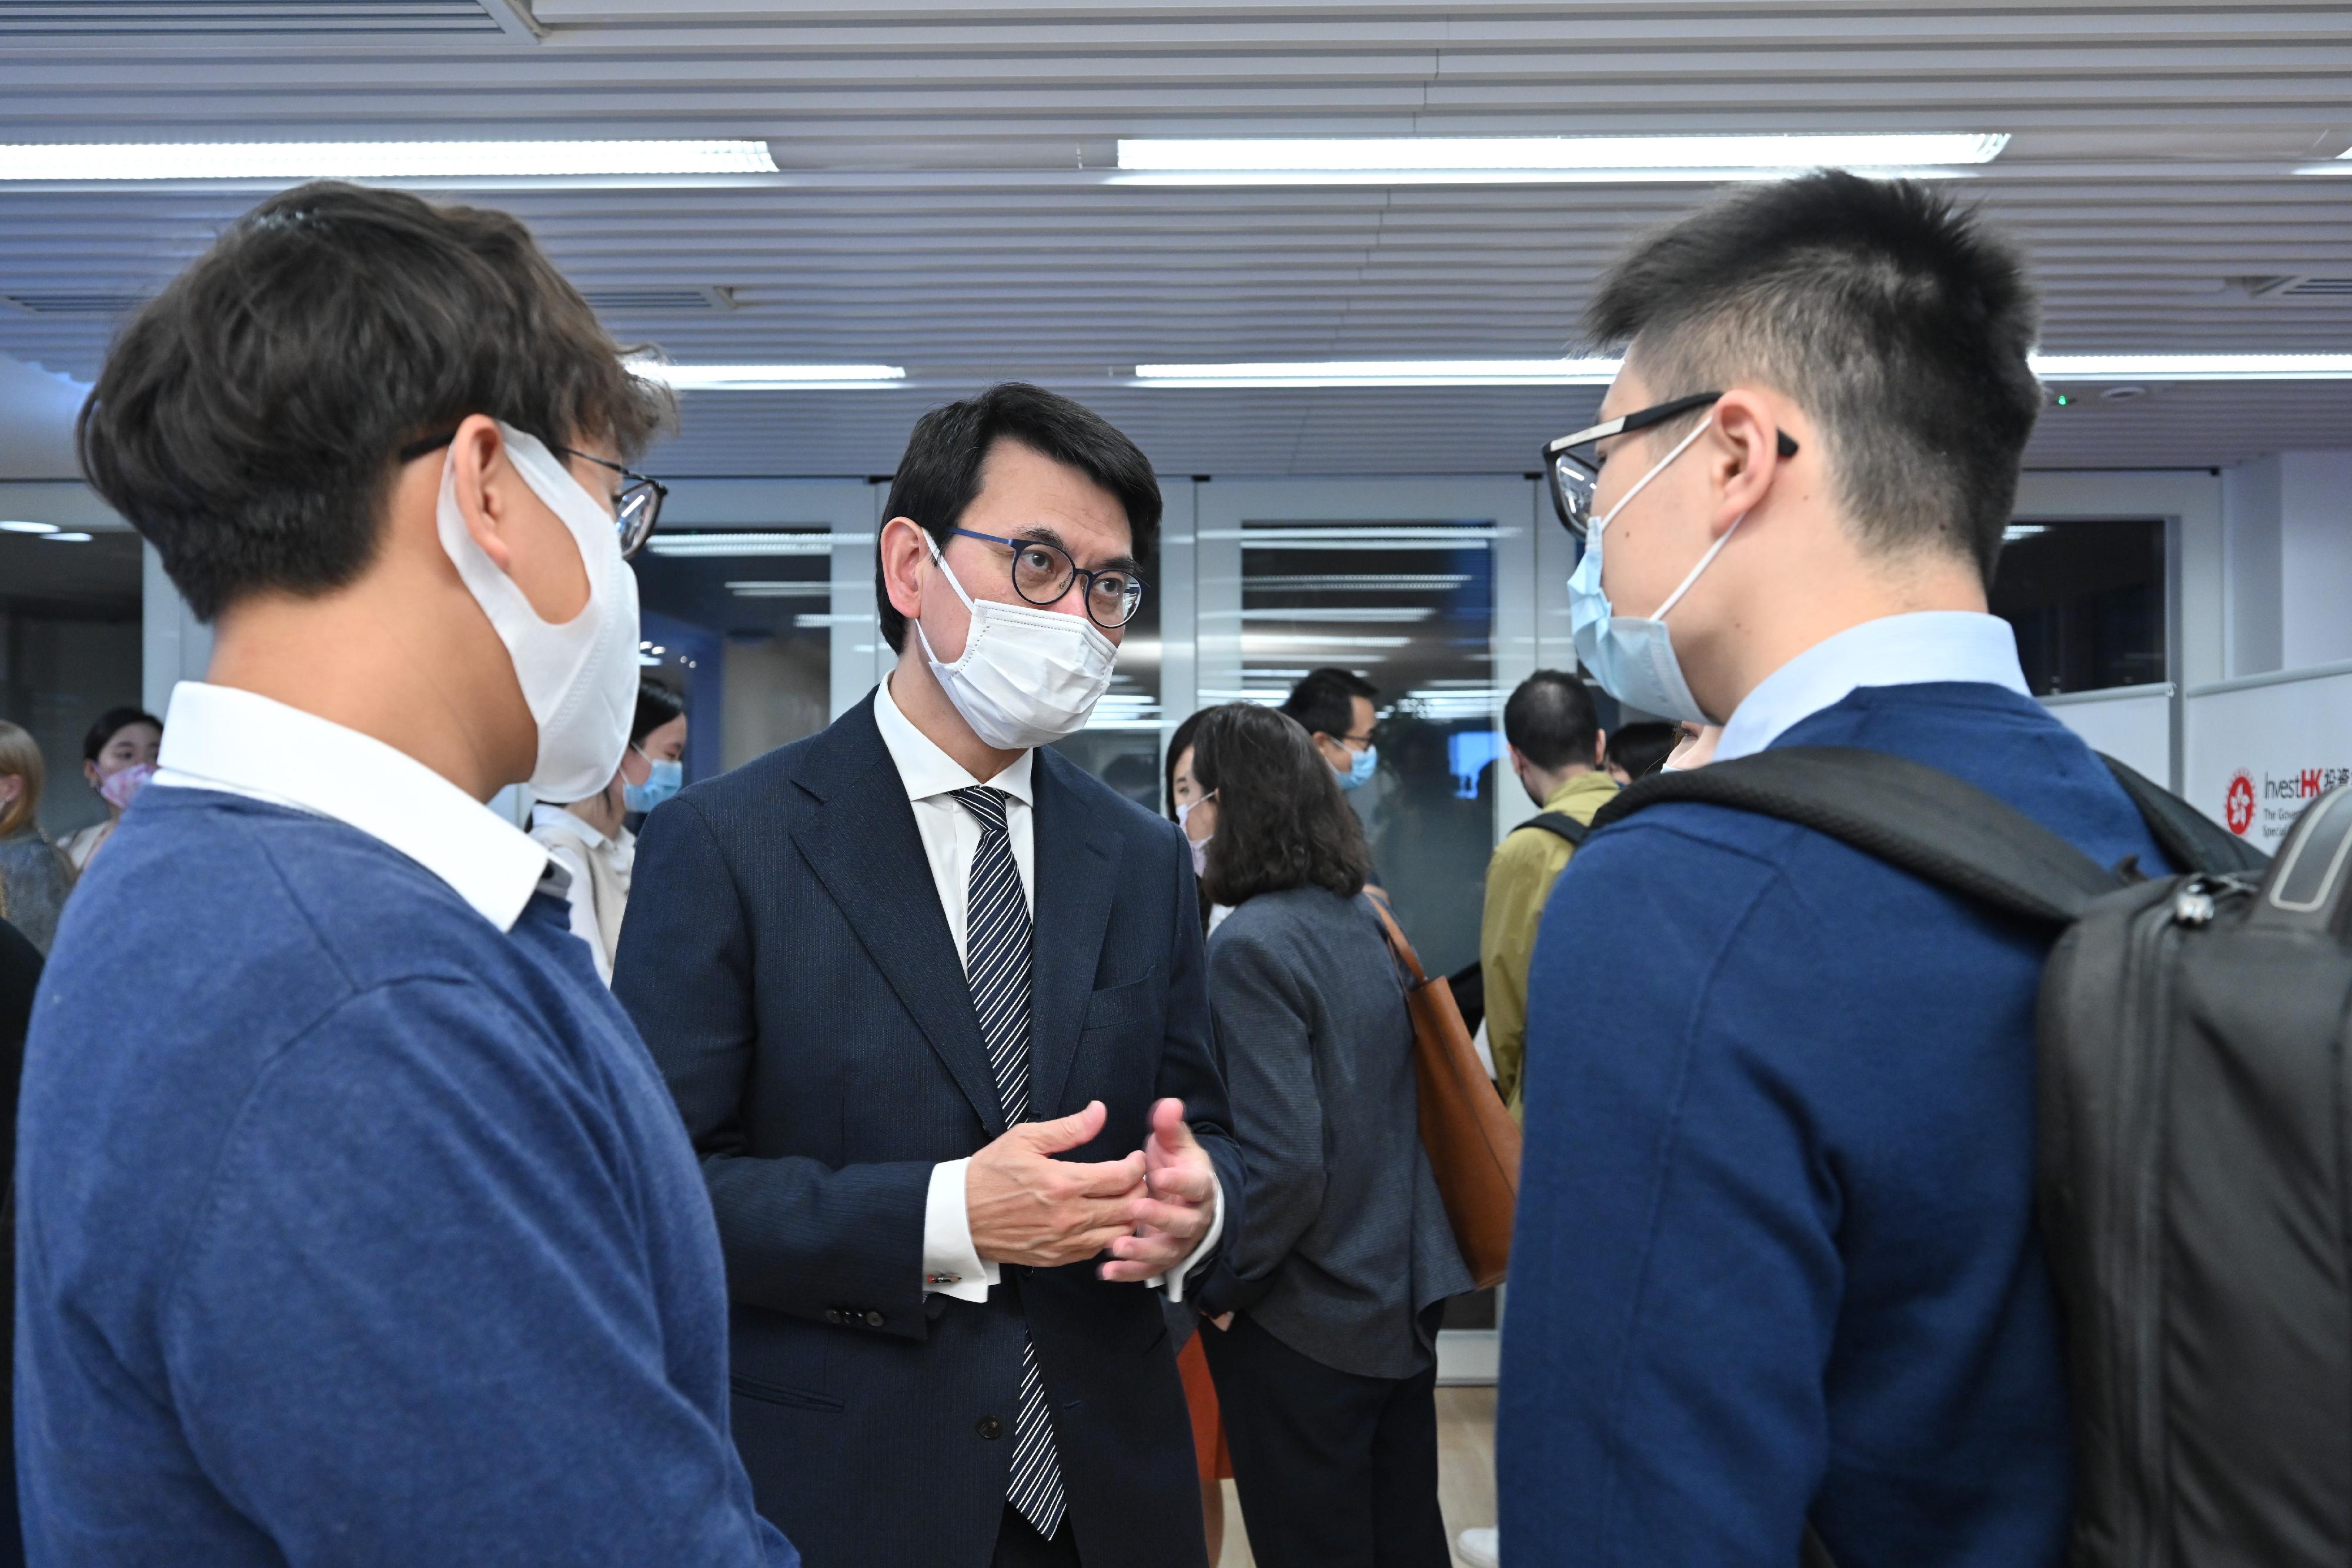 The Secretary for Commerce and Economic Development, Mr Edward Yau, met the participating companies and employees of the Future International Talent programme today (December 10). Photo shows Mr Yau (centre) chatting with participants at the meeting.